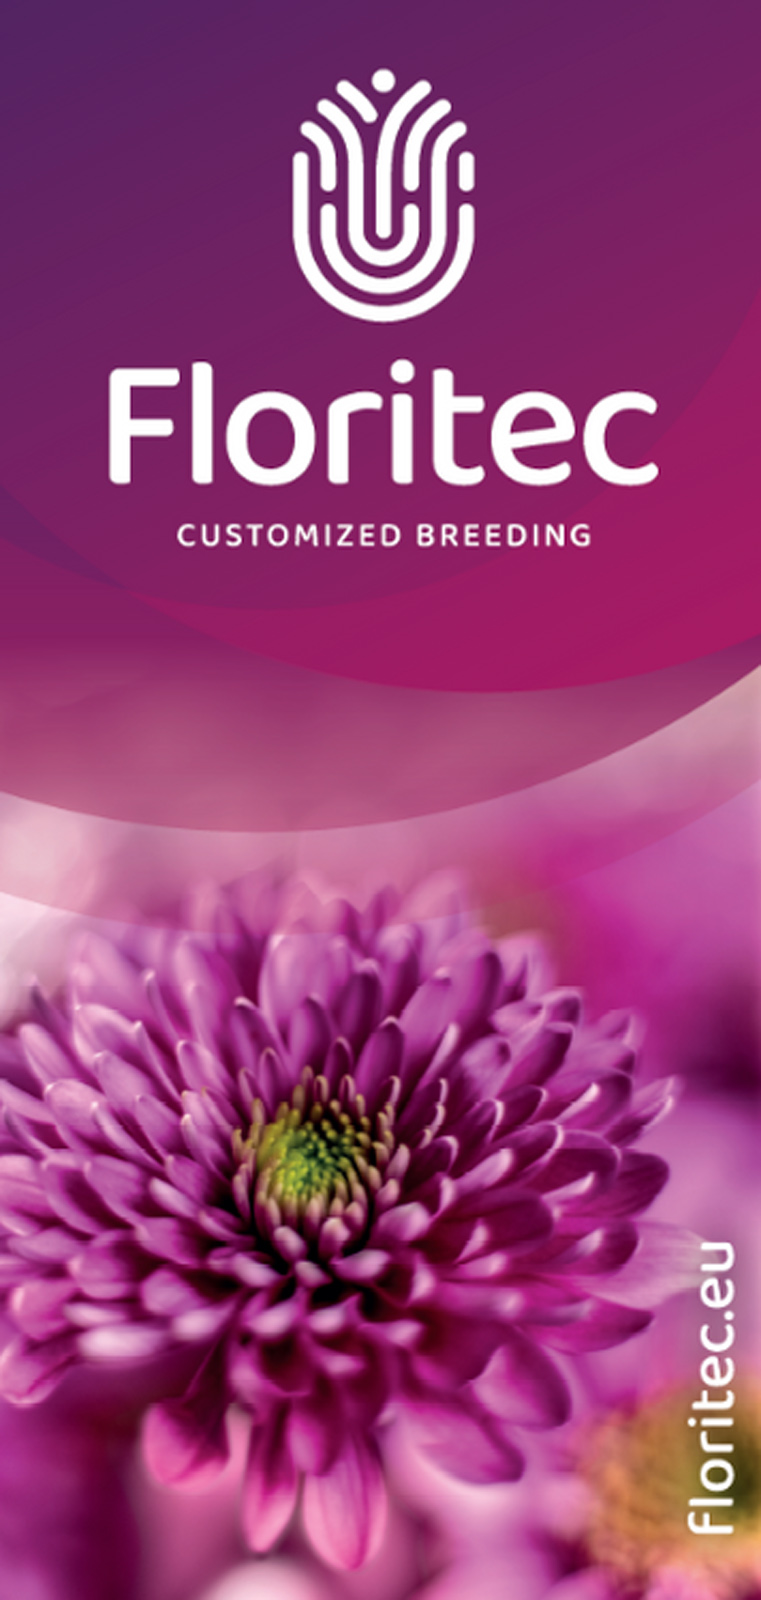 New Logo and Looks for Floritec 03